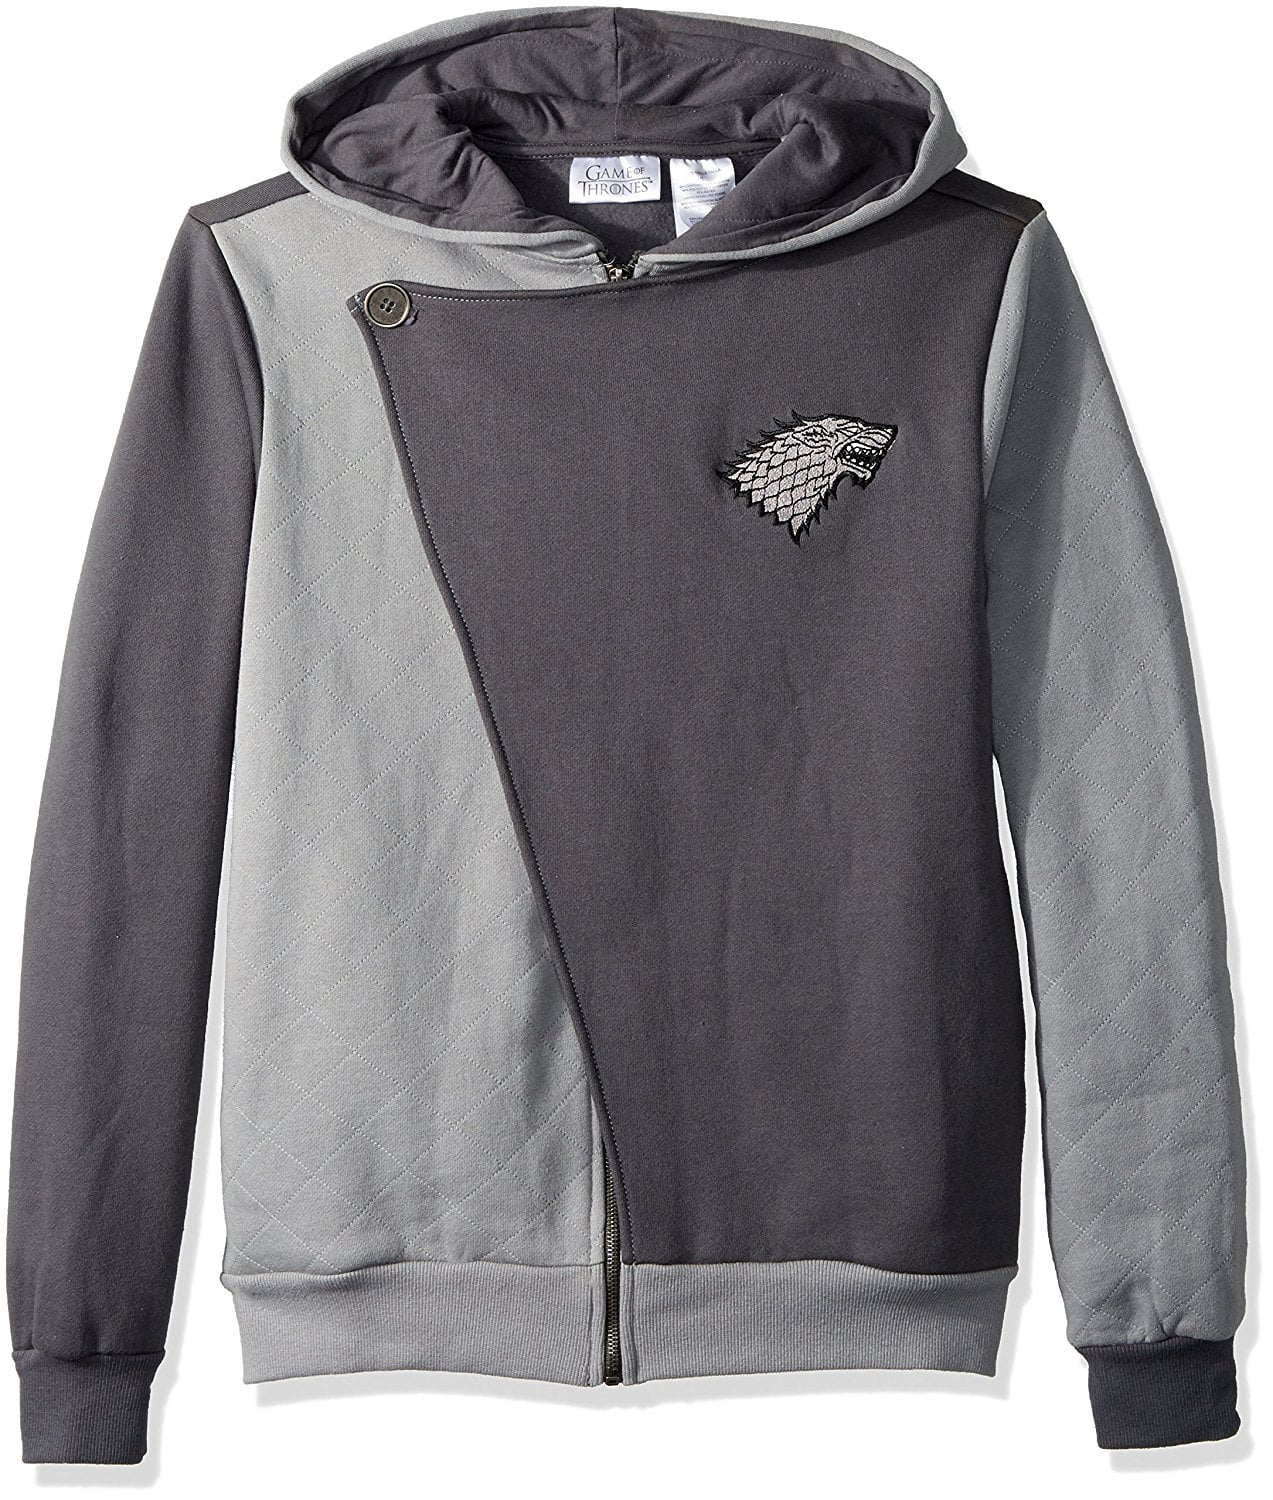 Game of Thrones House Stark Charcoal grey hoodie sizes S-XXL 